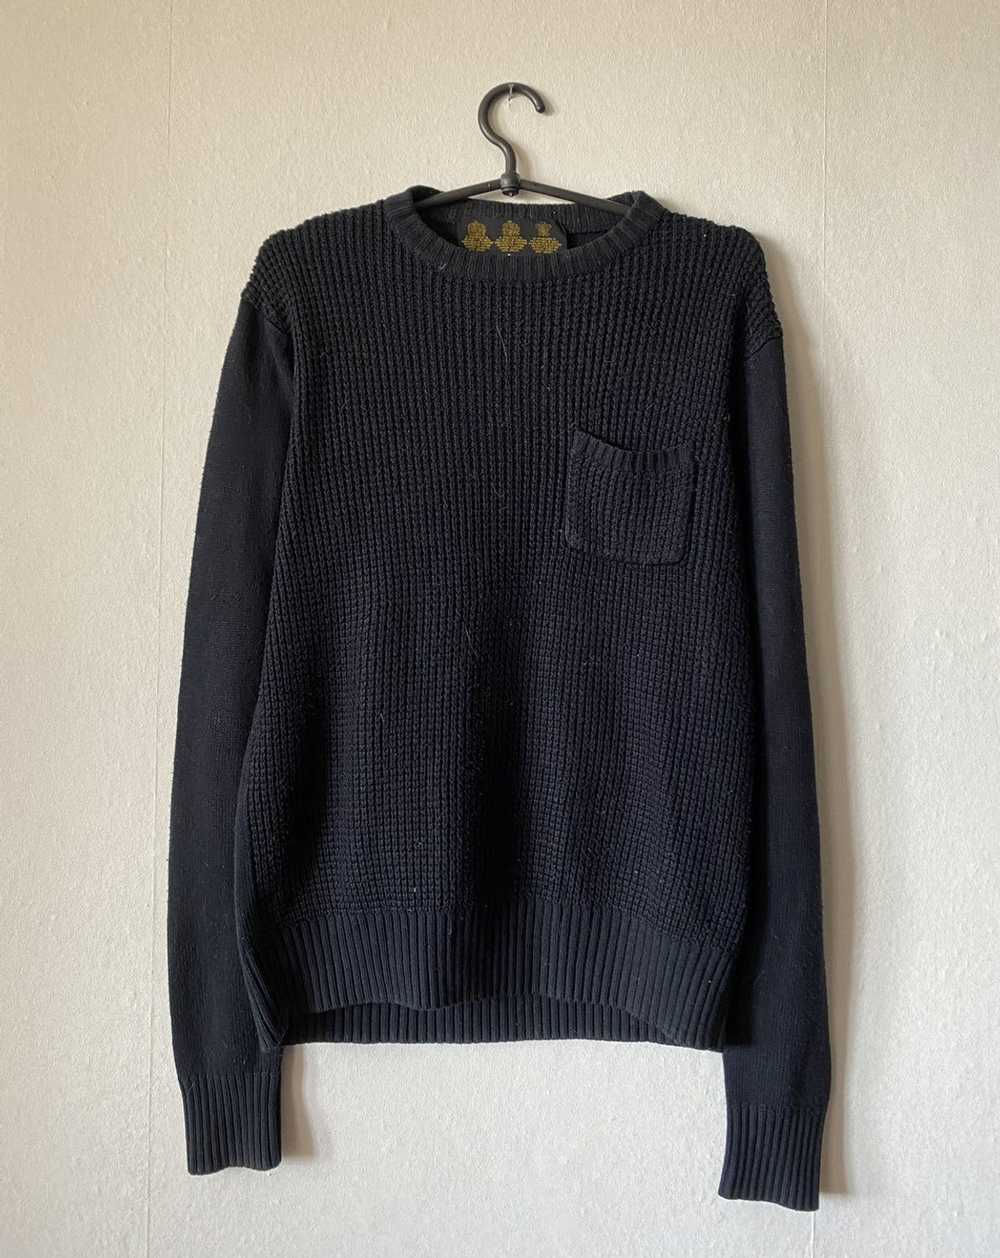 Barbour × Luxury × Vintage Barbour knit sweater - image 1